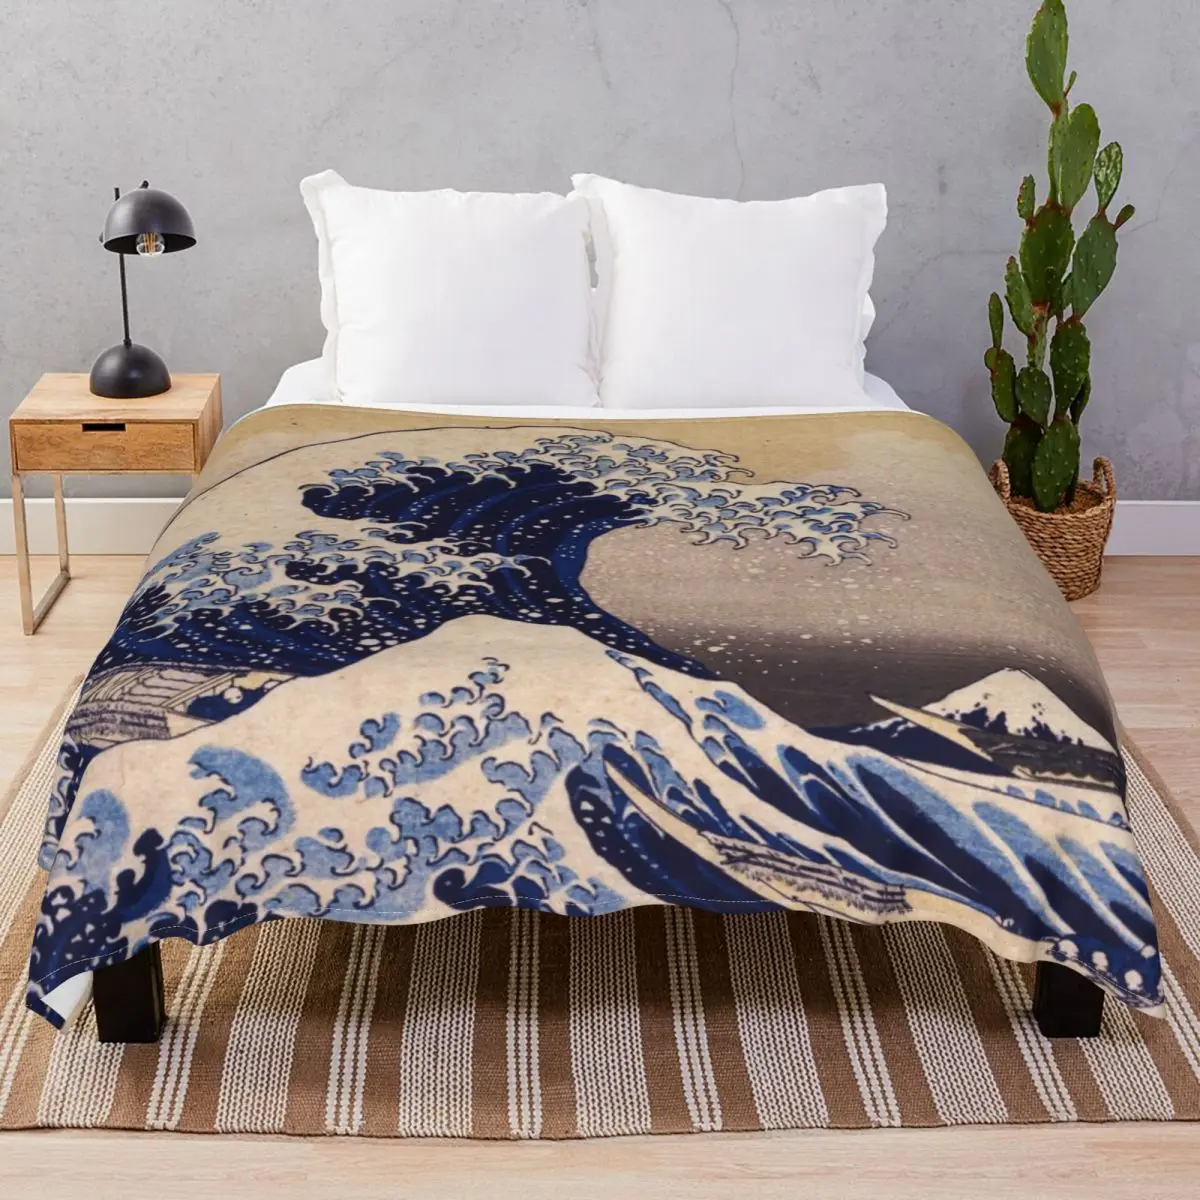 The Great Wave Off Kanagawa Blanket Velvet Print Portable Throw Blankets for Bed Home Couch Camp Office